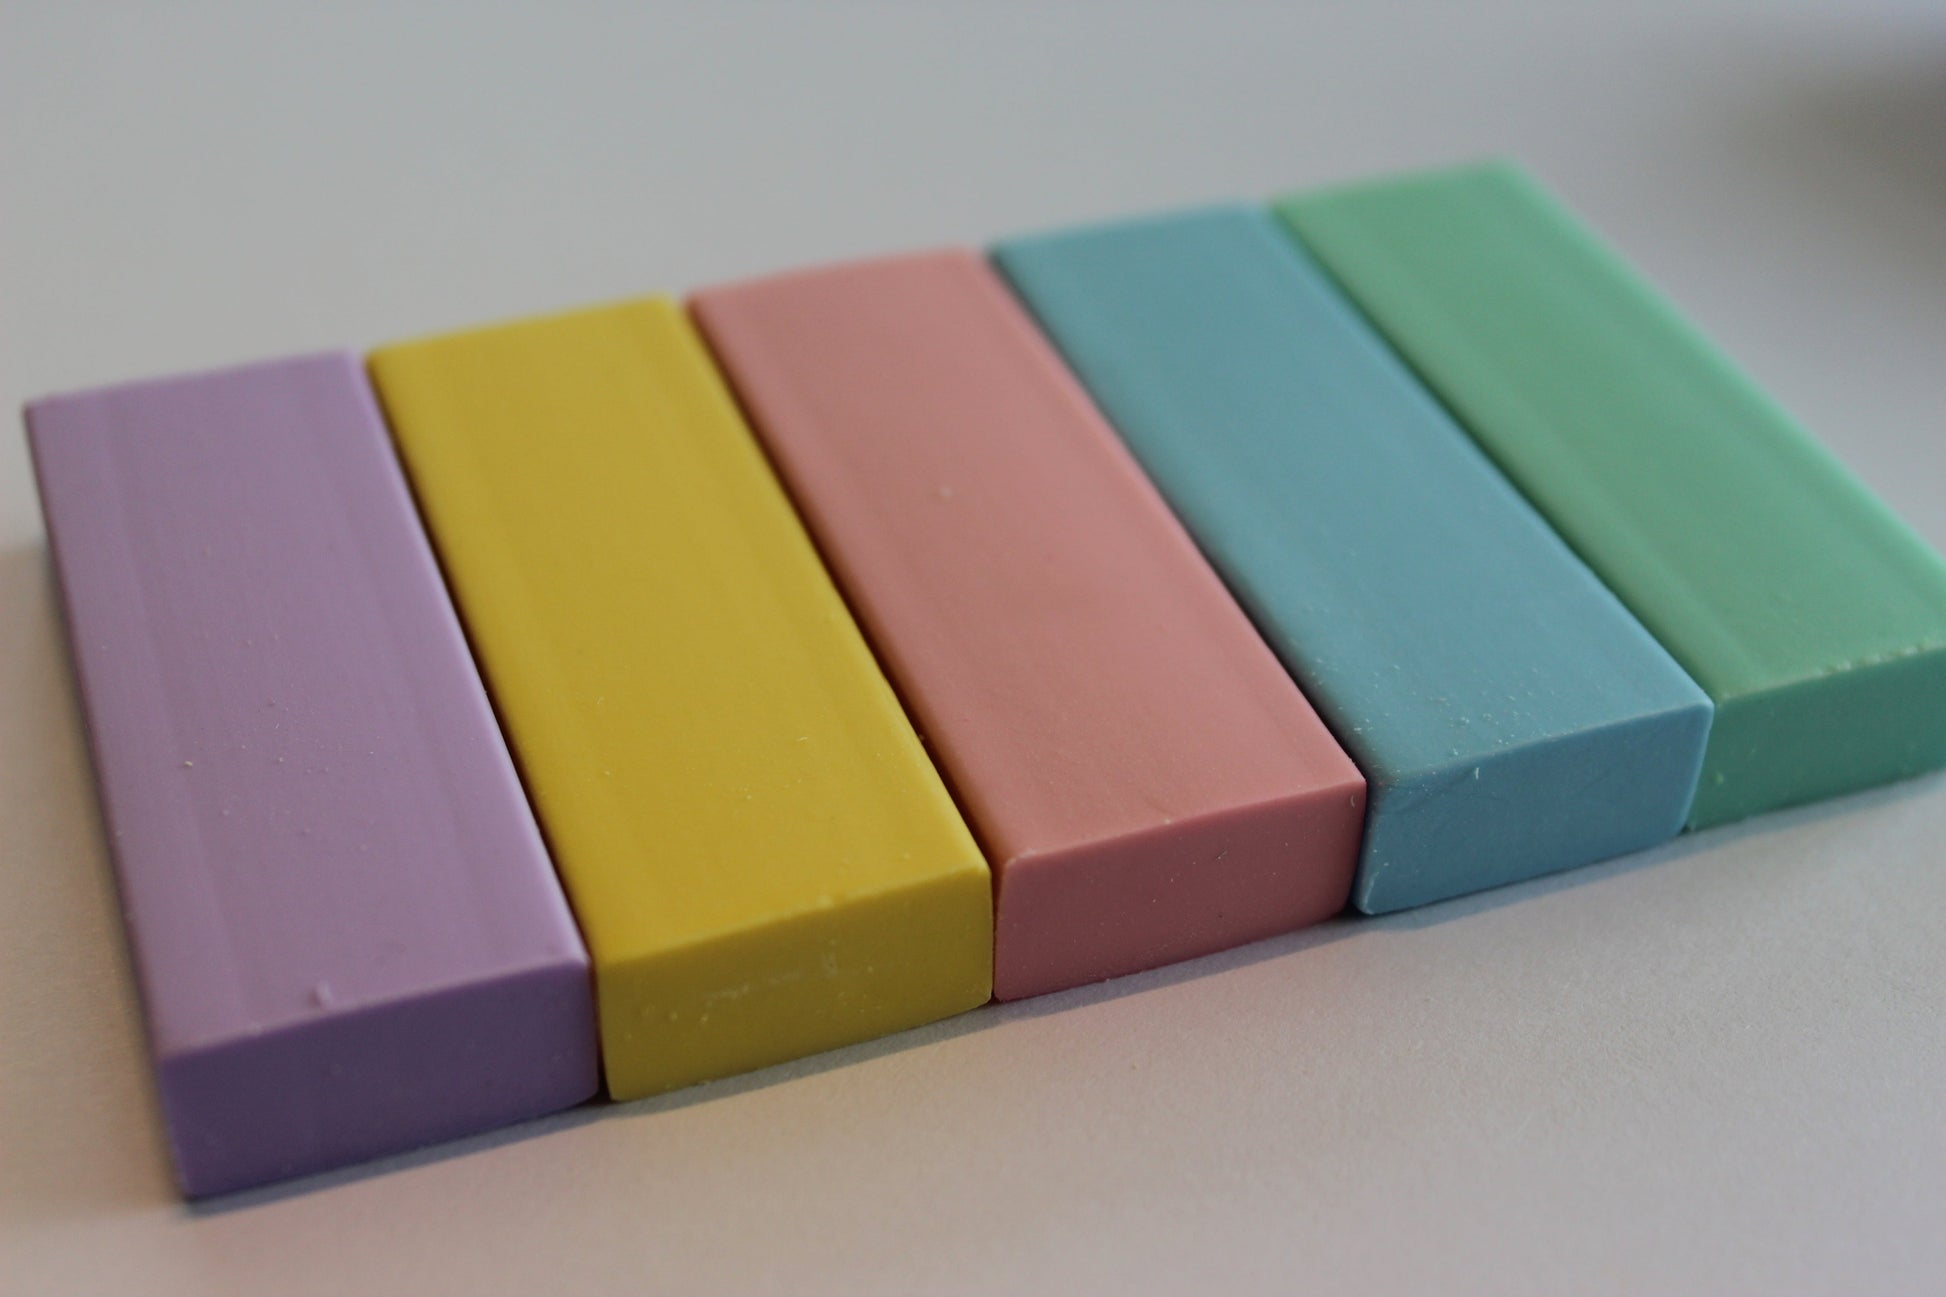 5 pastel rubbers in purple, yellow, pink, blue and green.